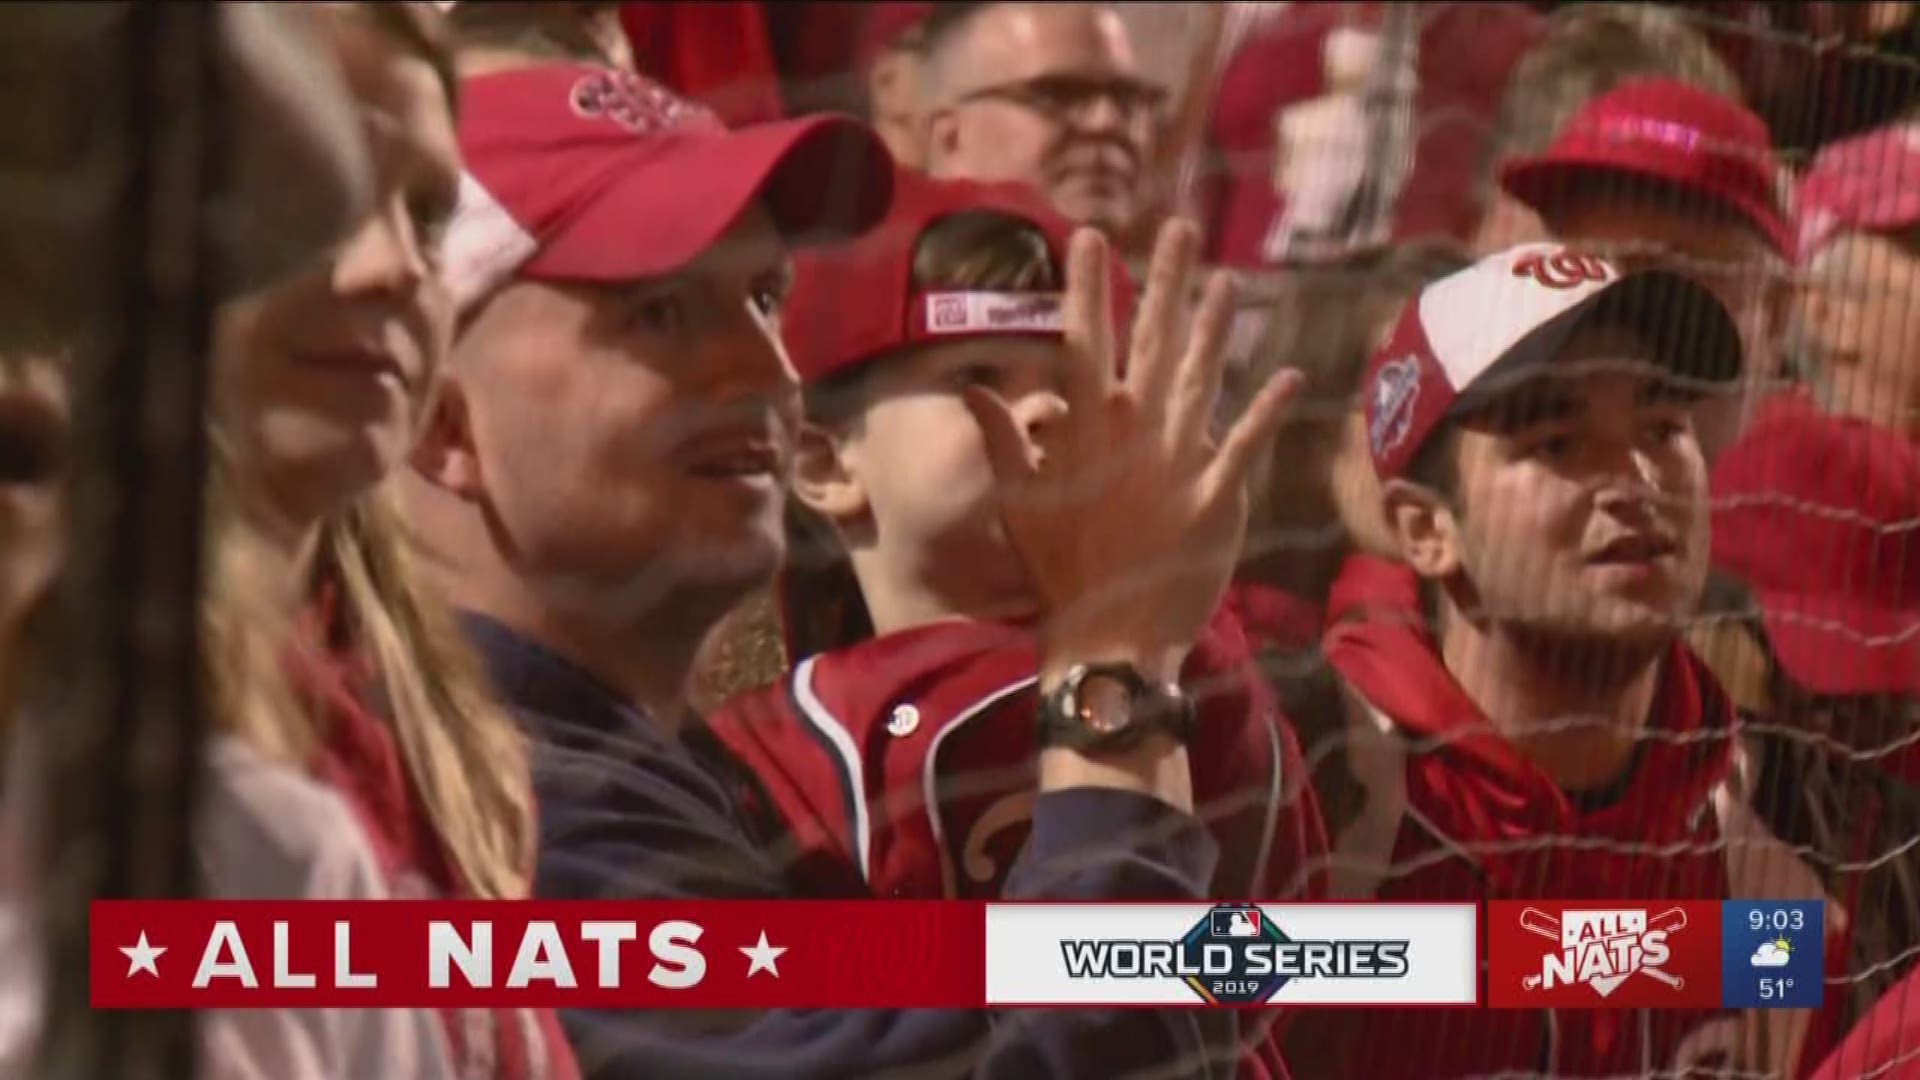 For our morning mix series, we give you the rundown on the latest news. This morning, its all about the Nationals, who won the first game in the World Series!